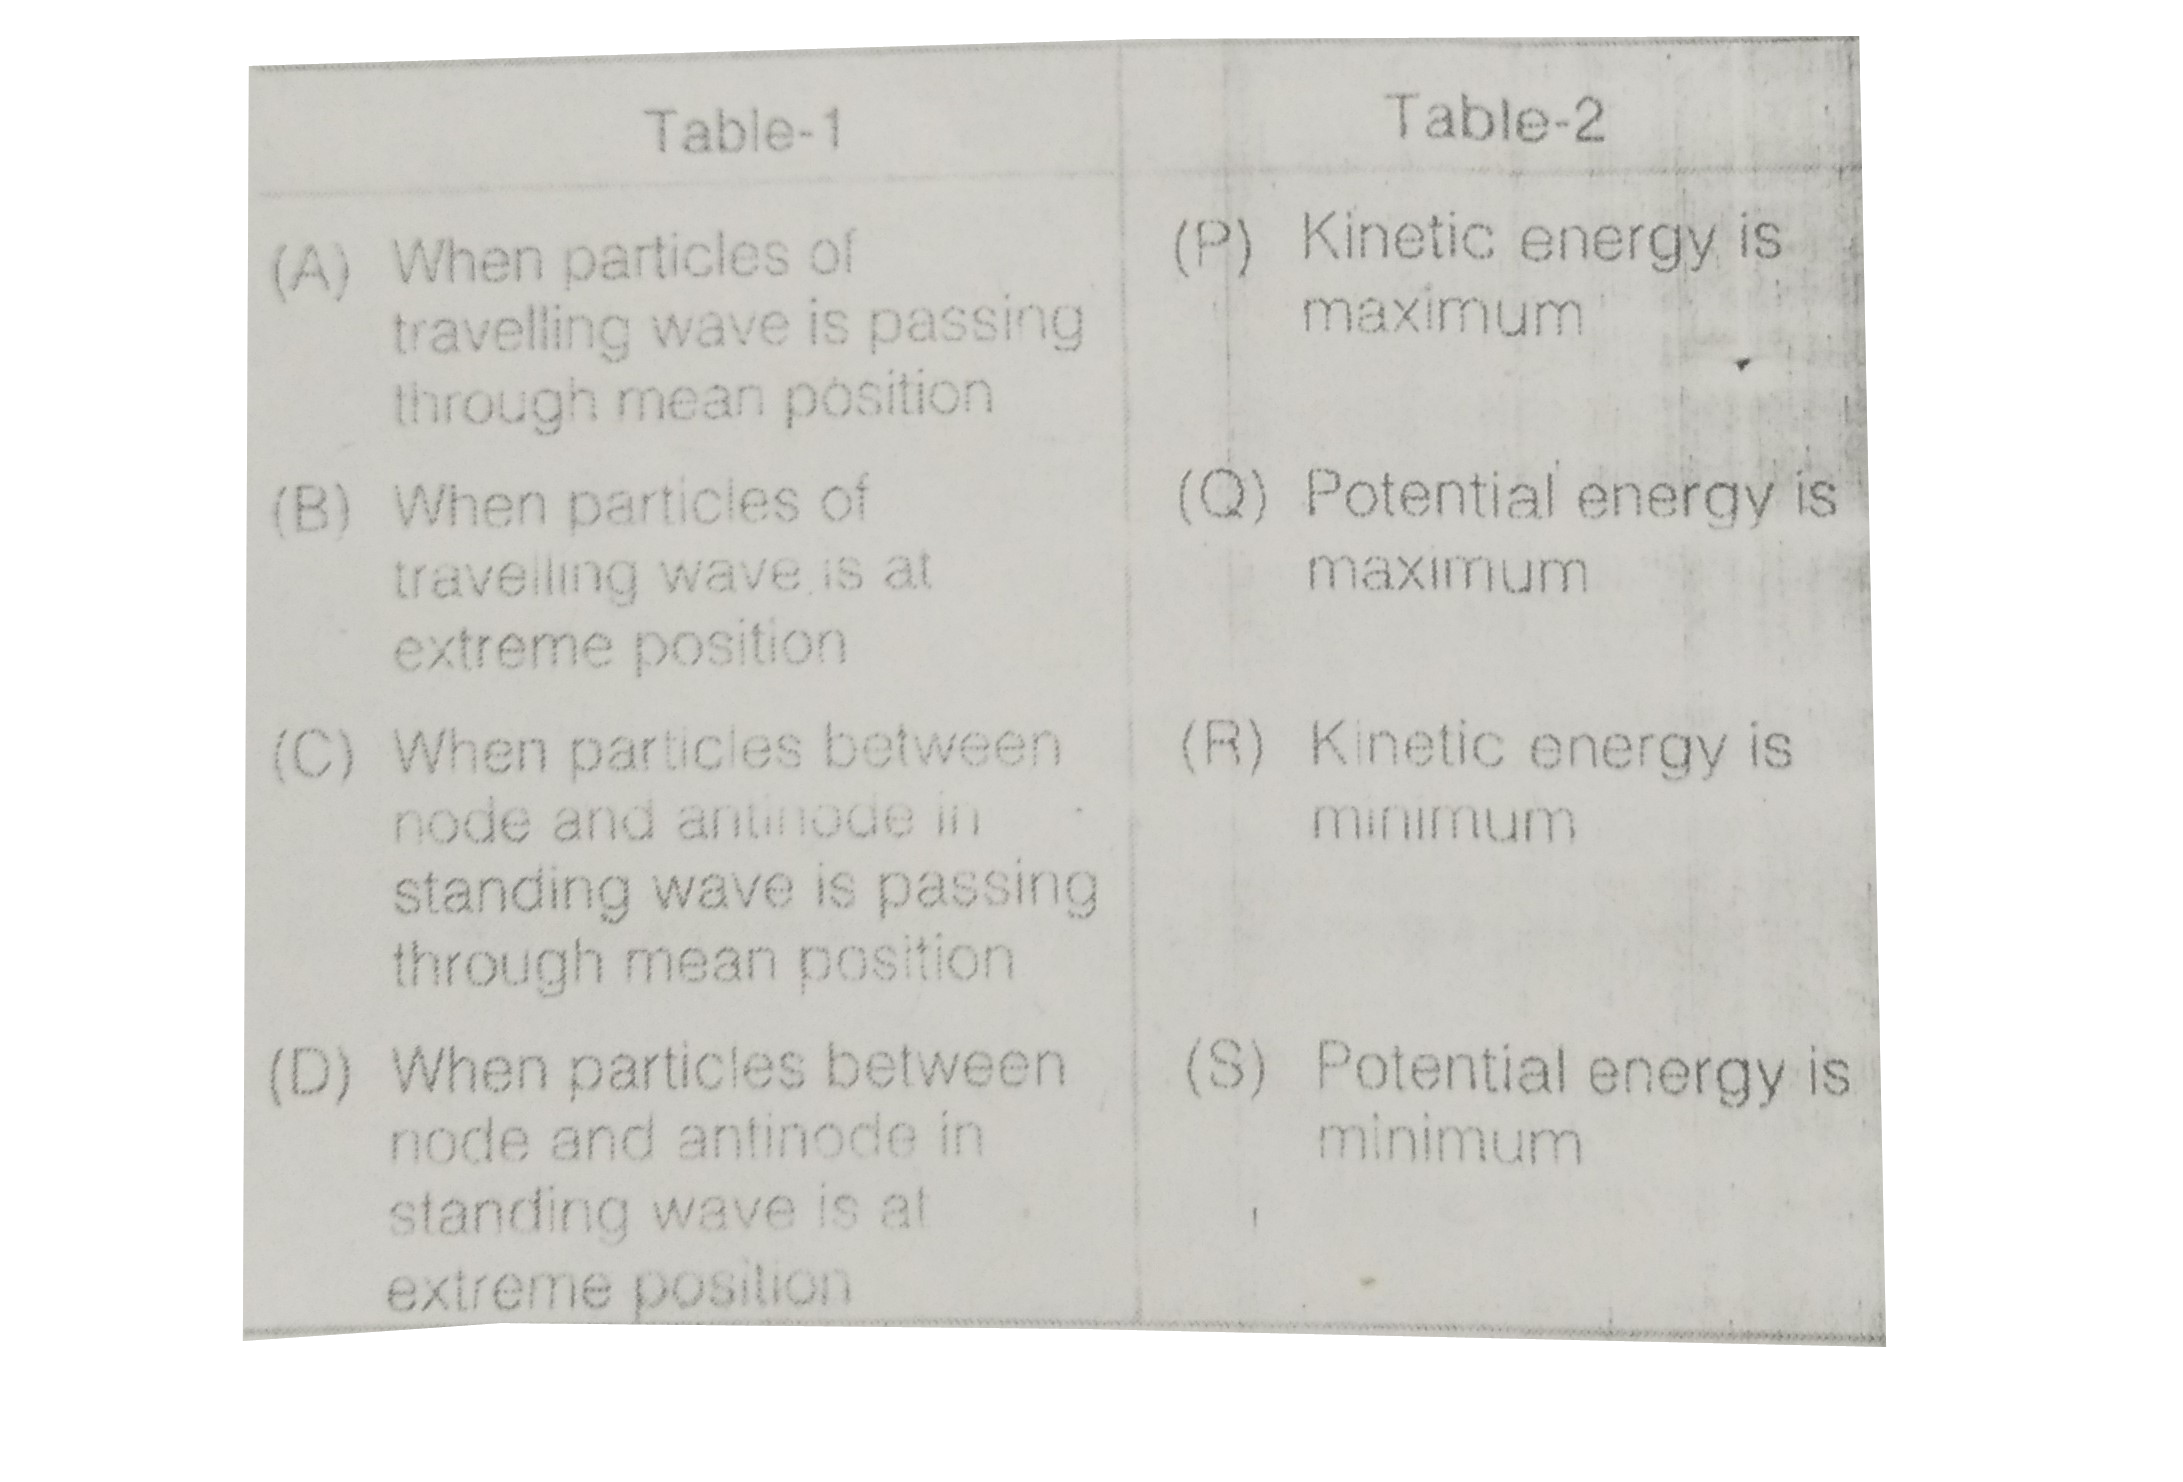 In case of mechanical wave a particle oscillates and during oscillation its kinetic energy and potential  energy changes.